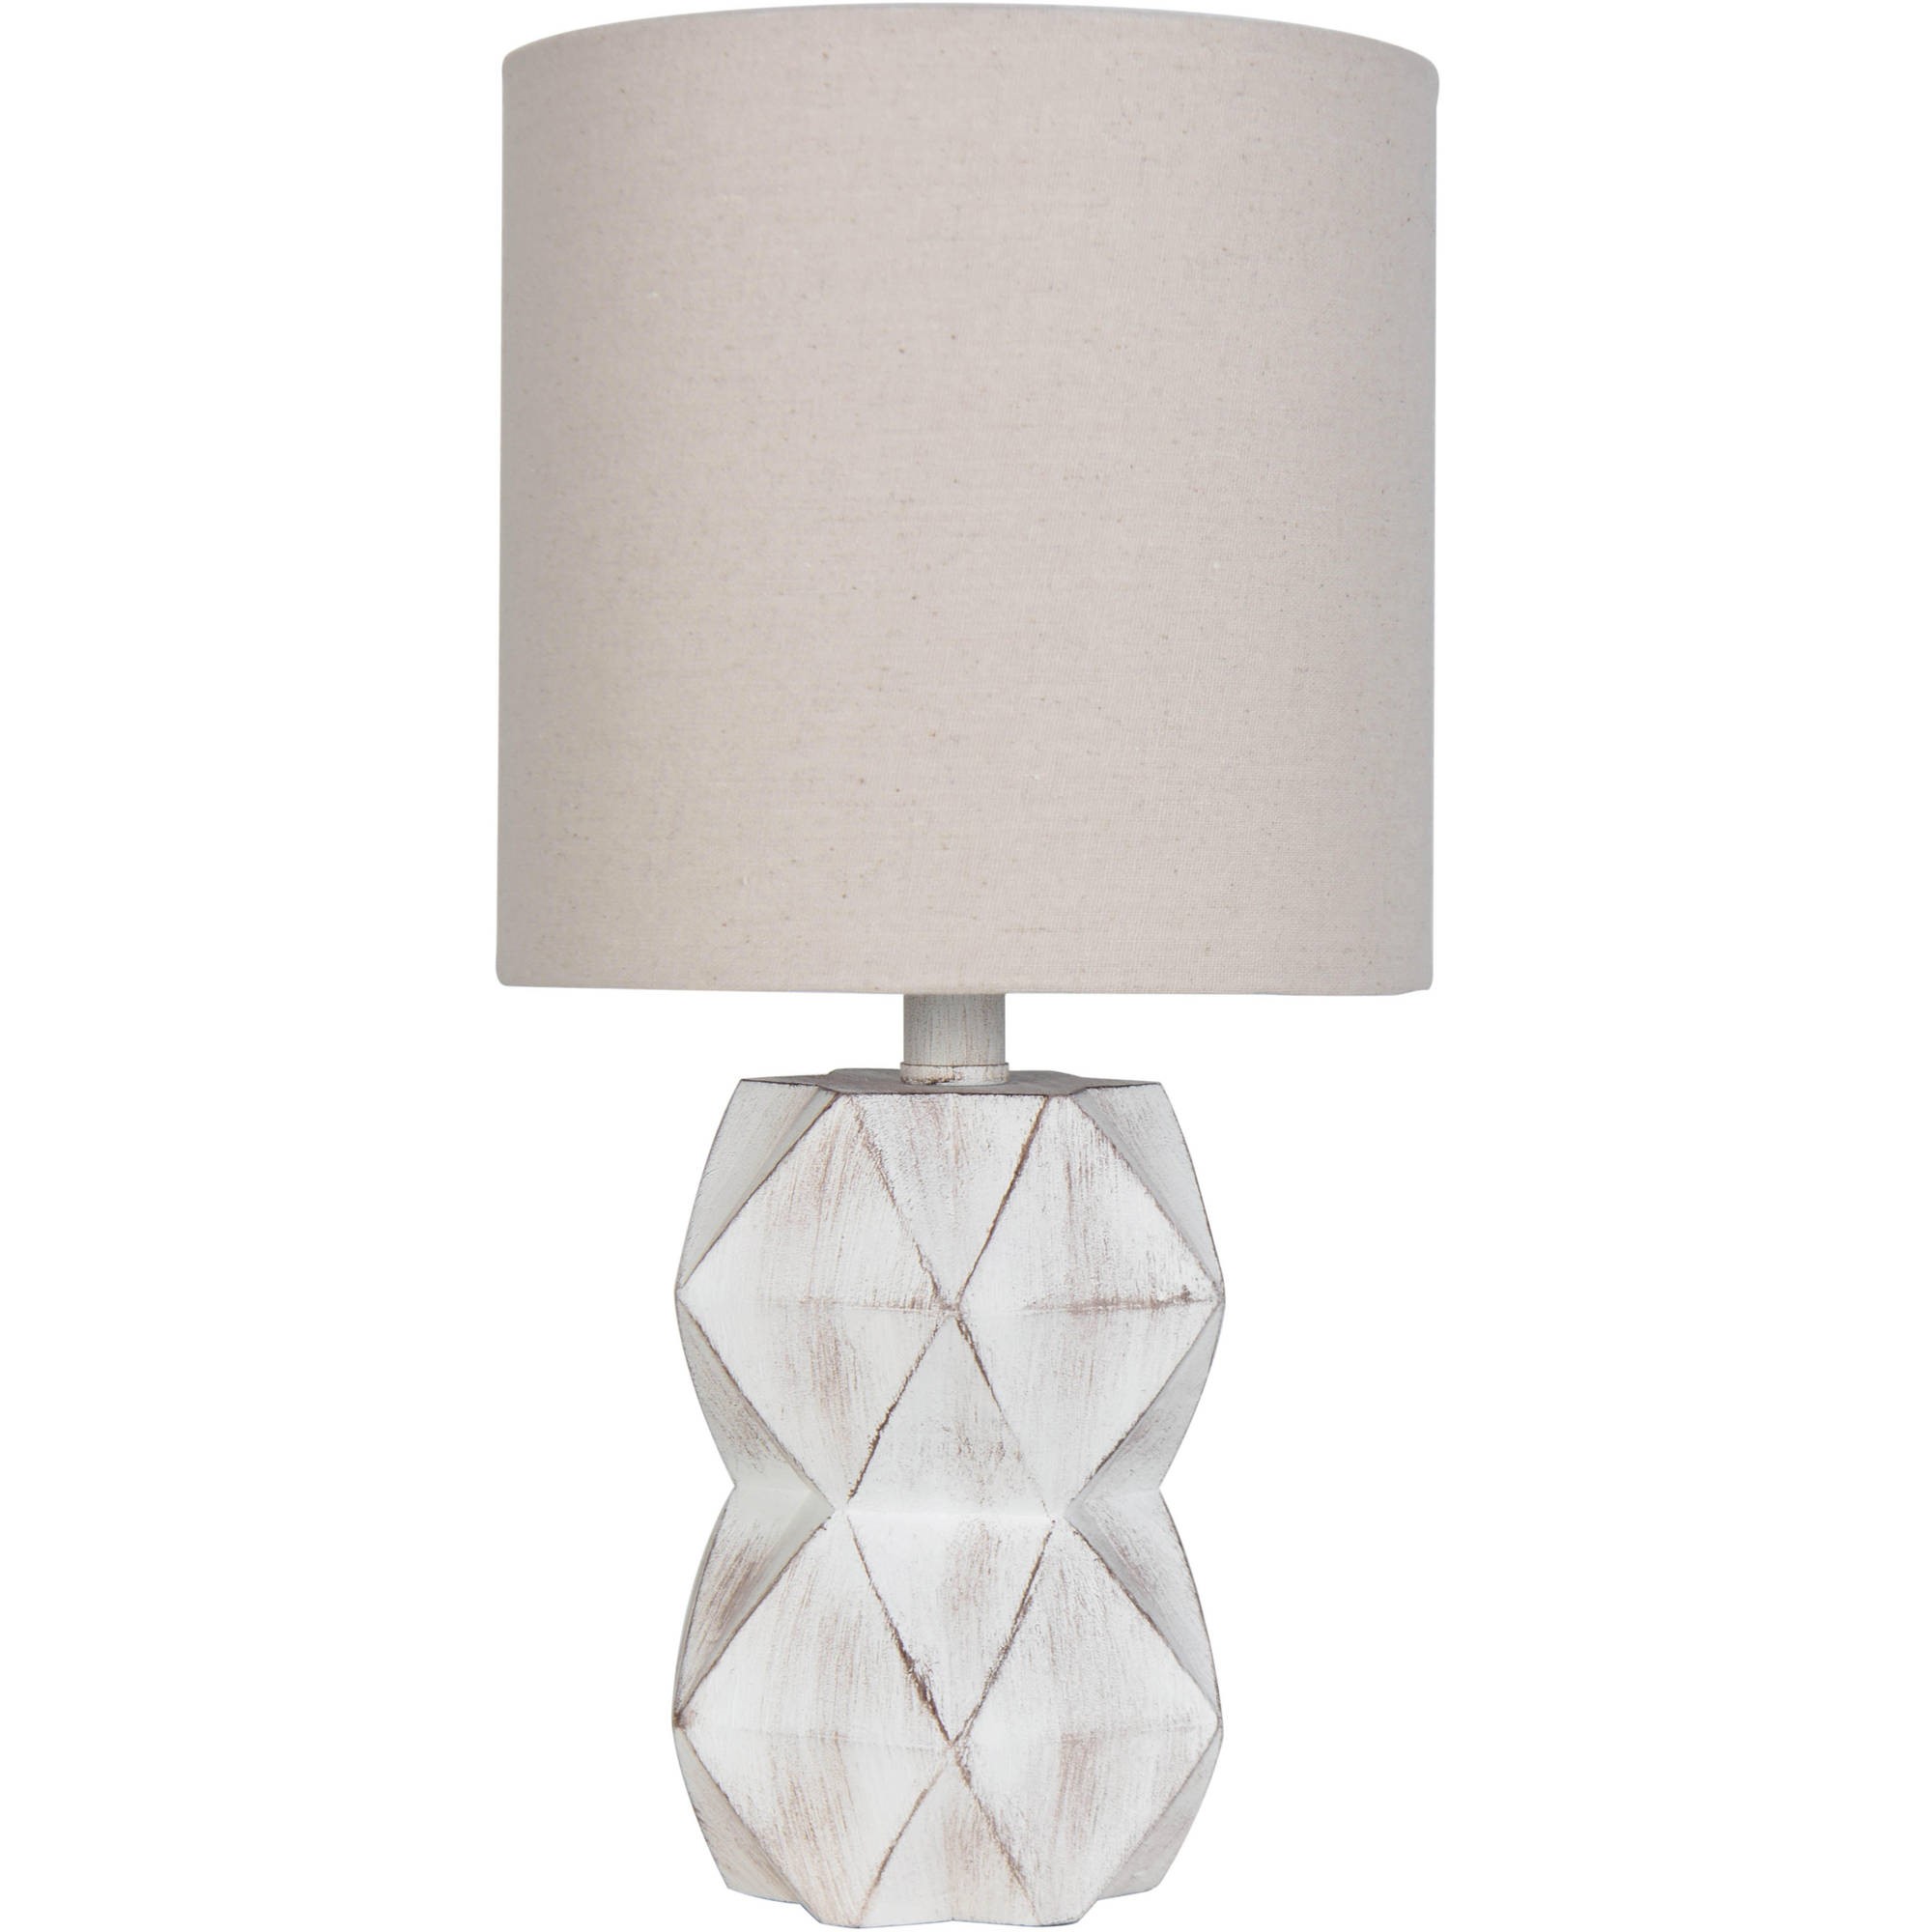 Better Homes & Gardens White Wash Faceted Faux Wood Table Lamp - image 1 of 10